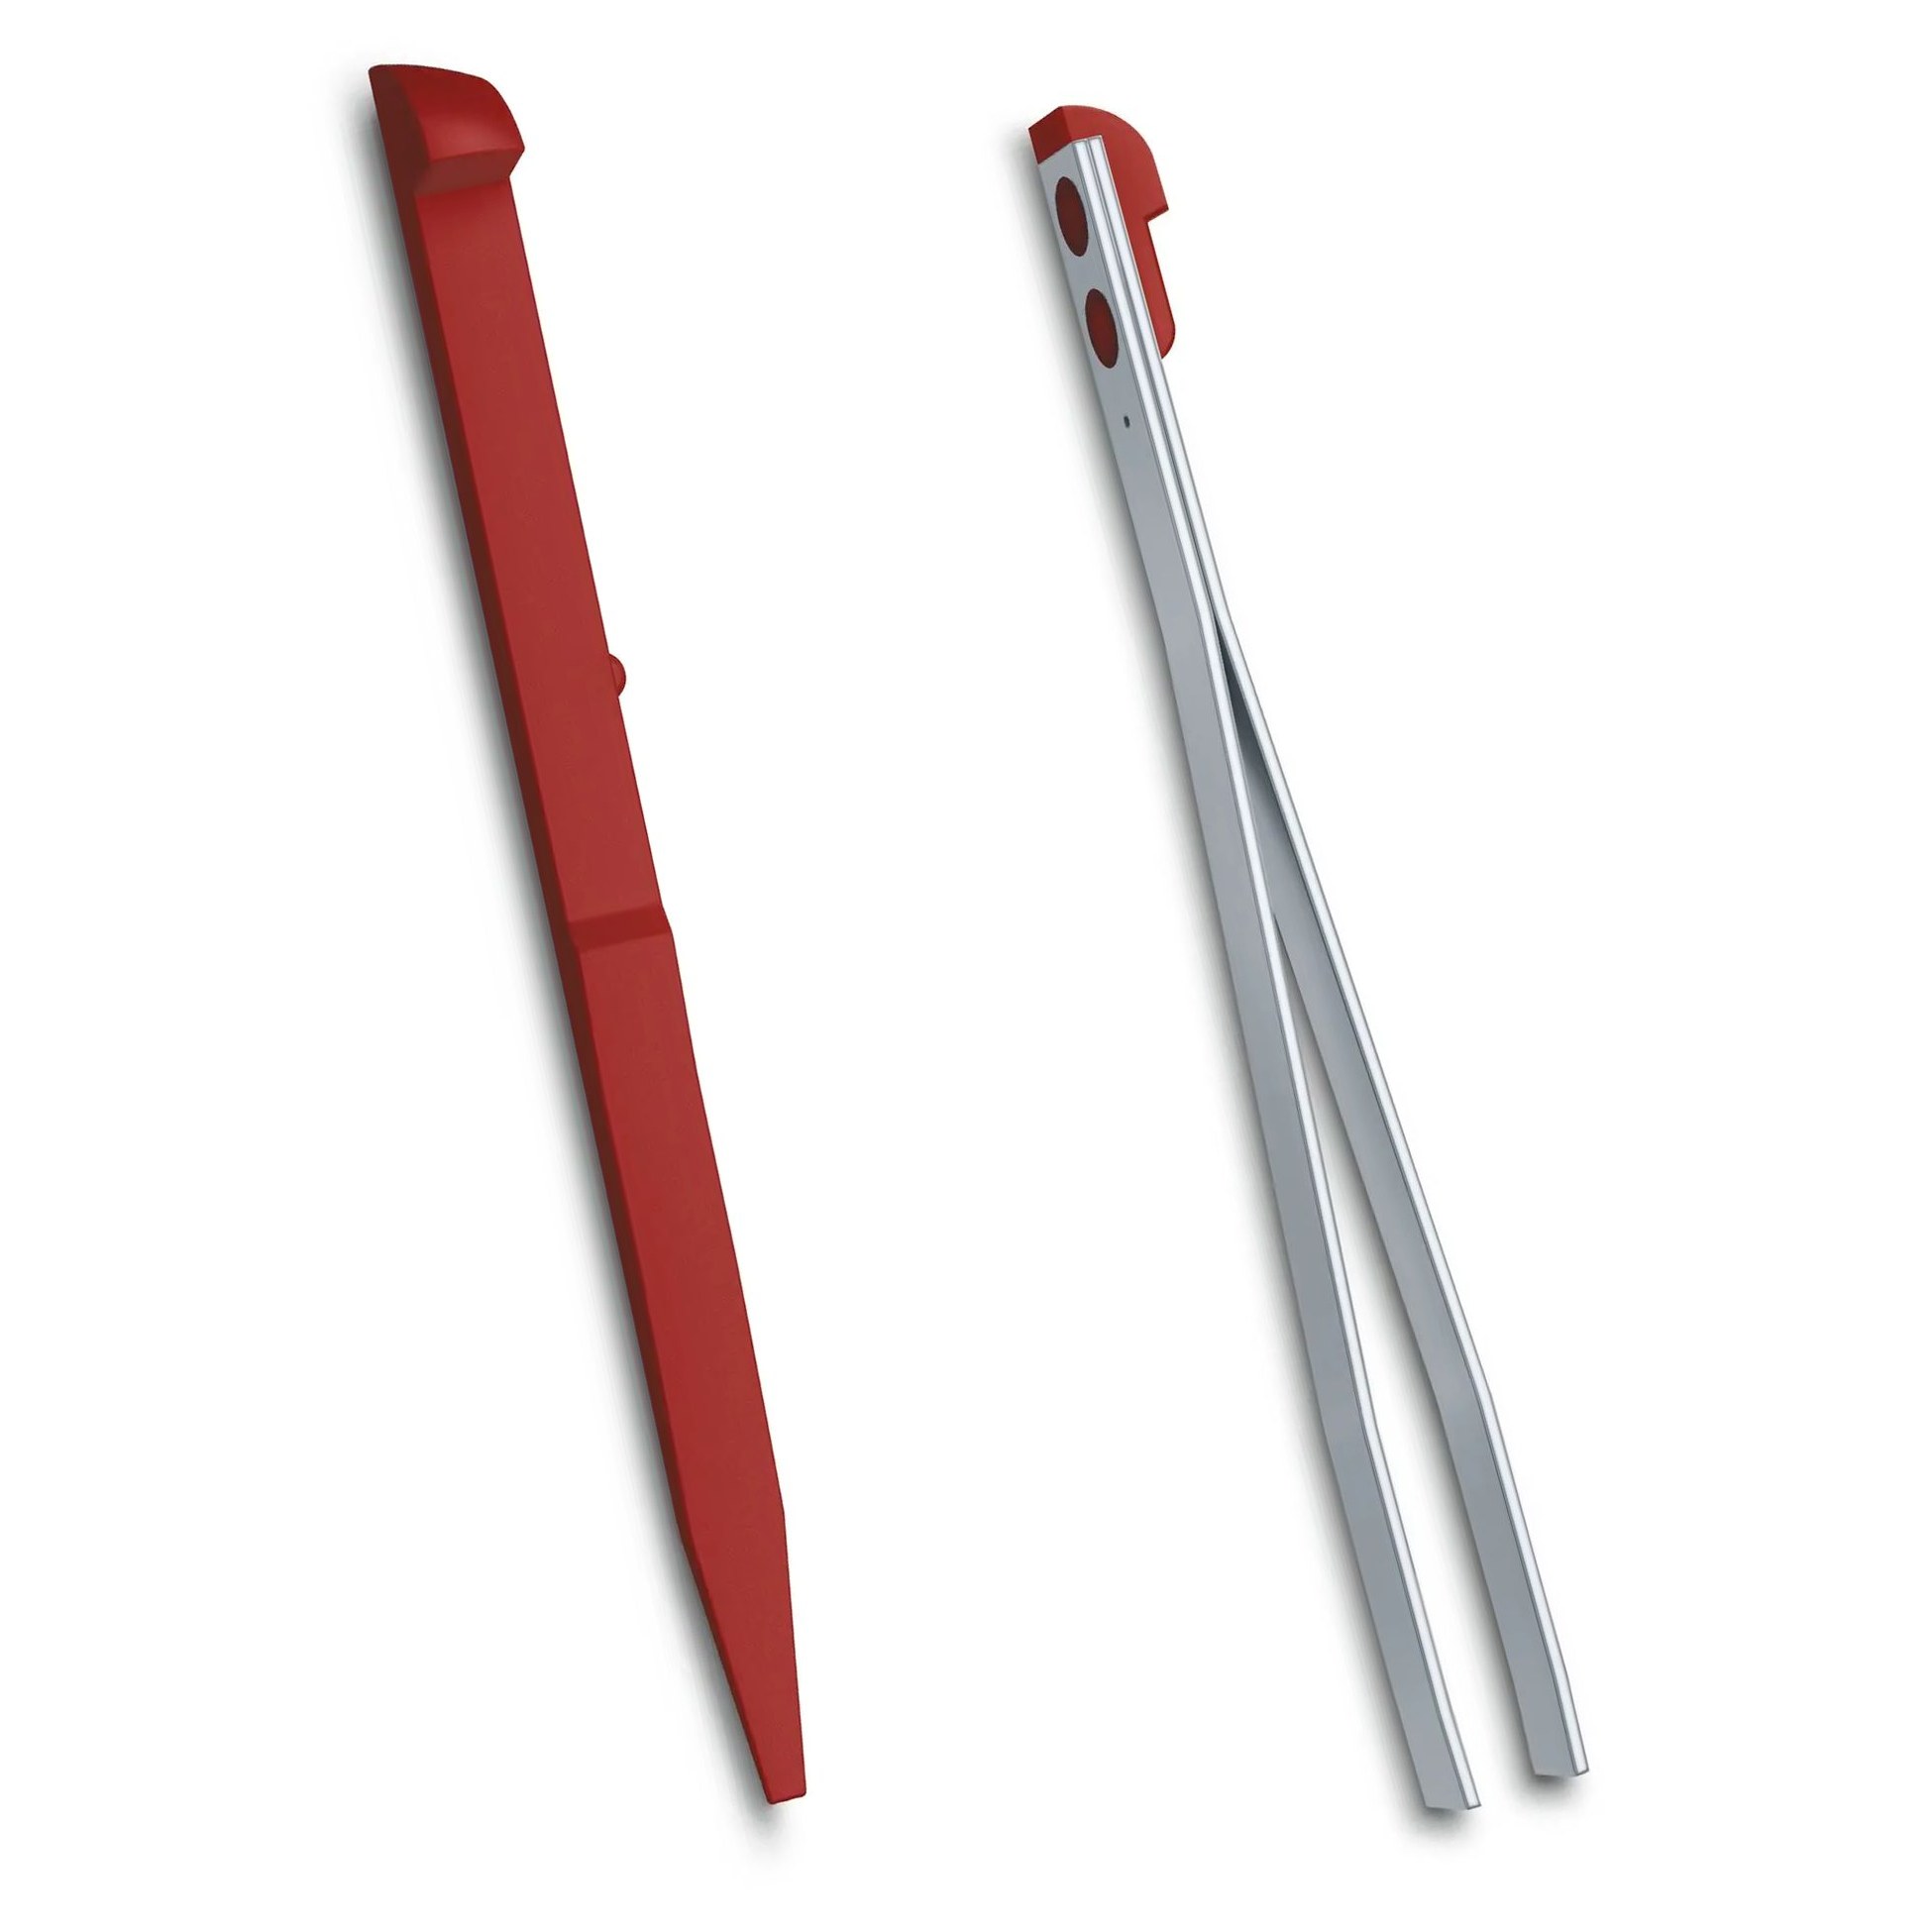 Victorinox Red toothpick + tweezers spares for LARGE 91mm swiss army knife - official Victorinox stockist